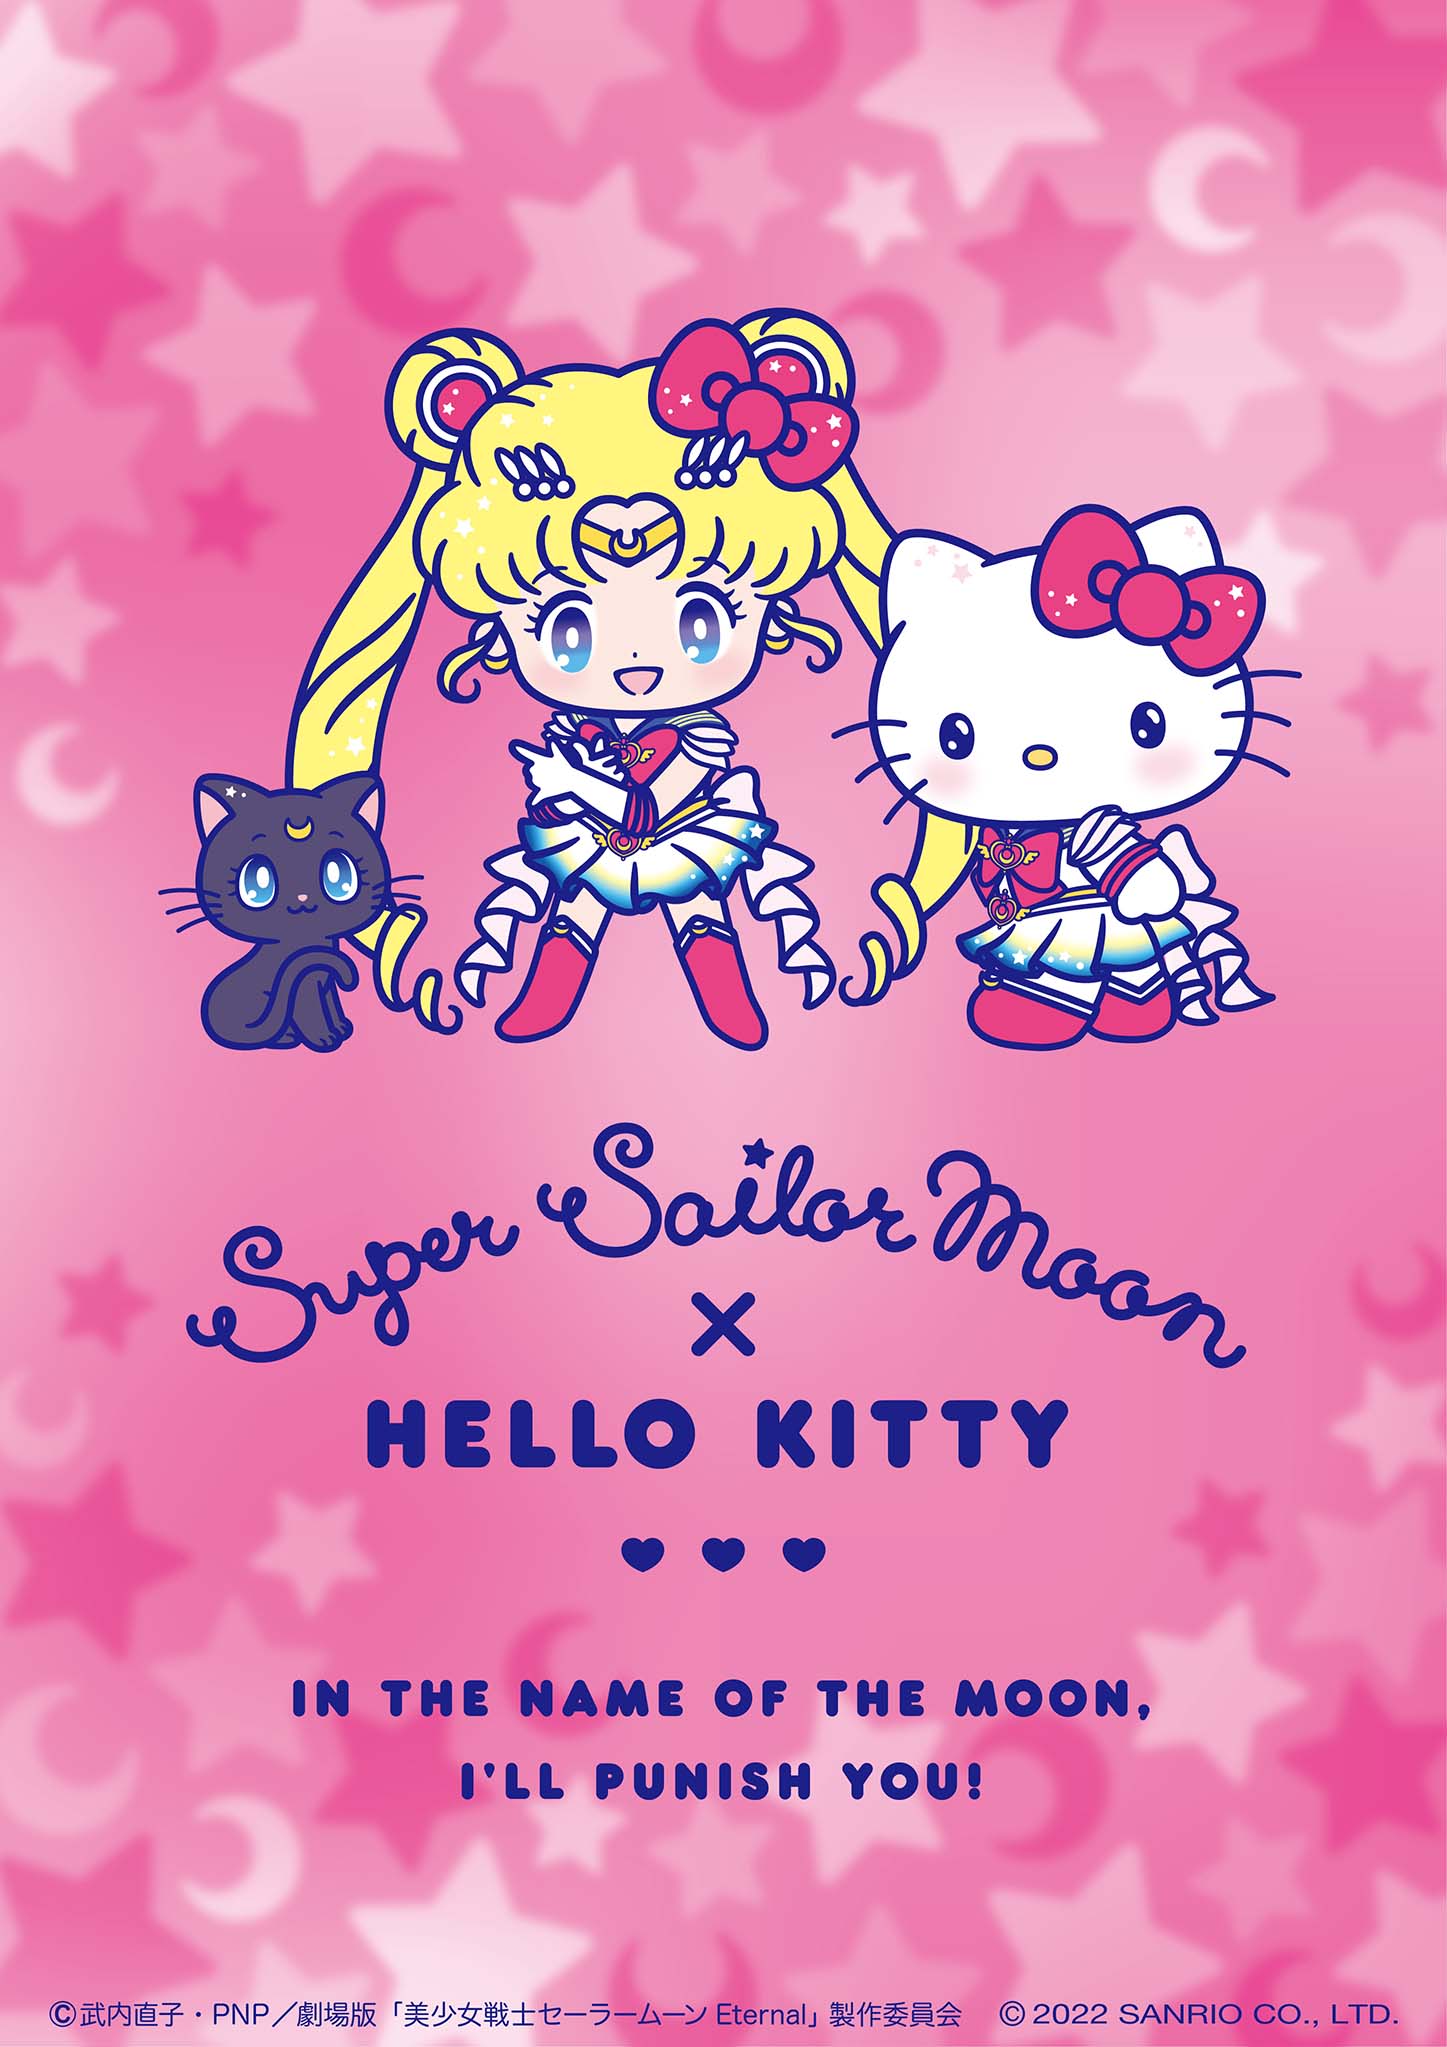 Jimmy Choo is dropping a Sailor Moon collaboration on Valentine's Day